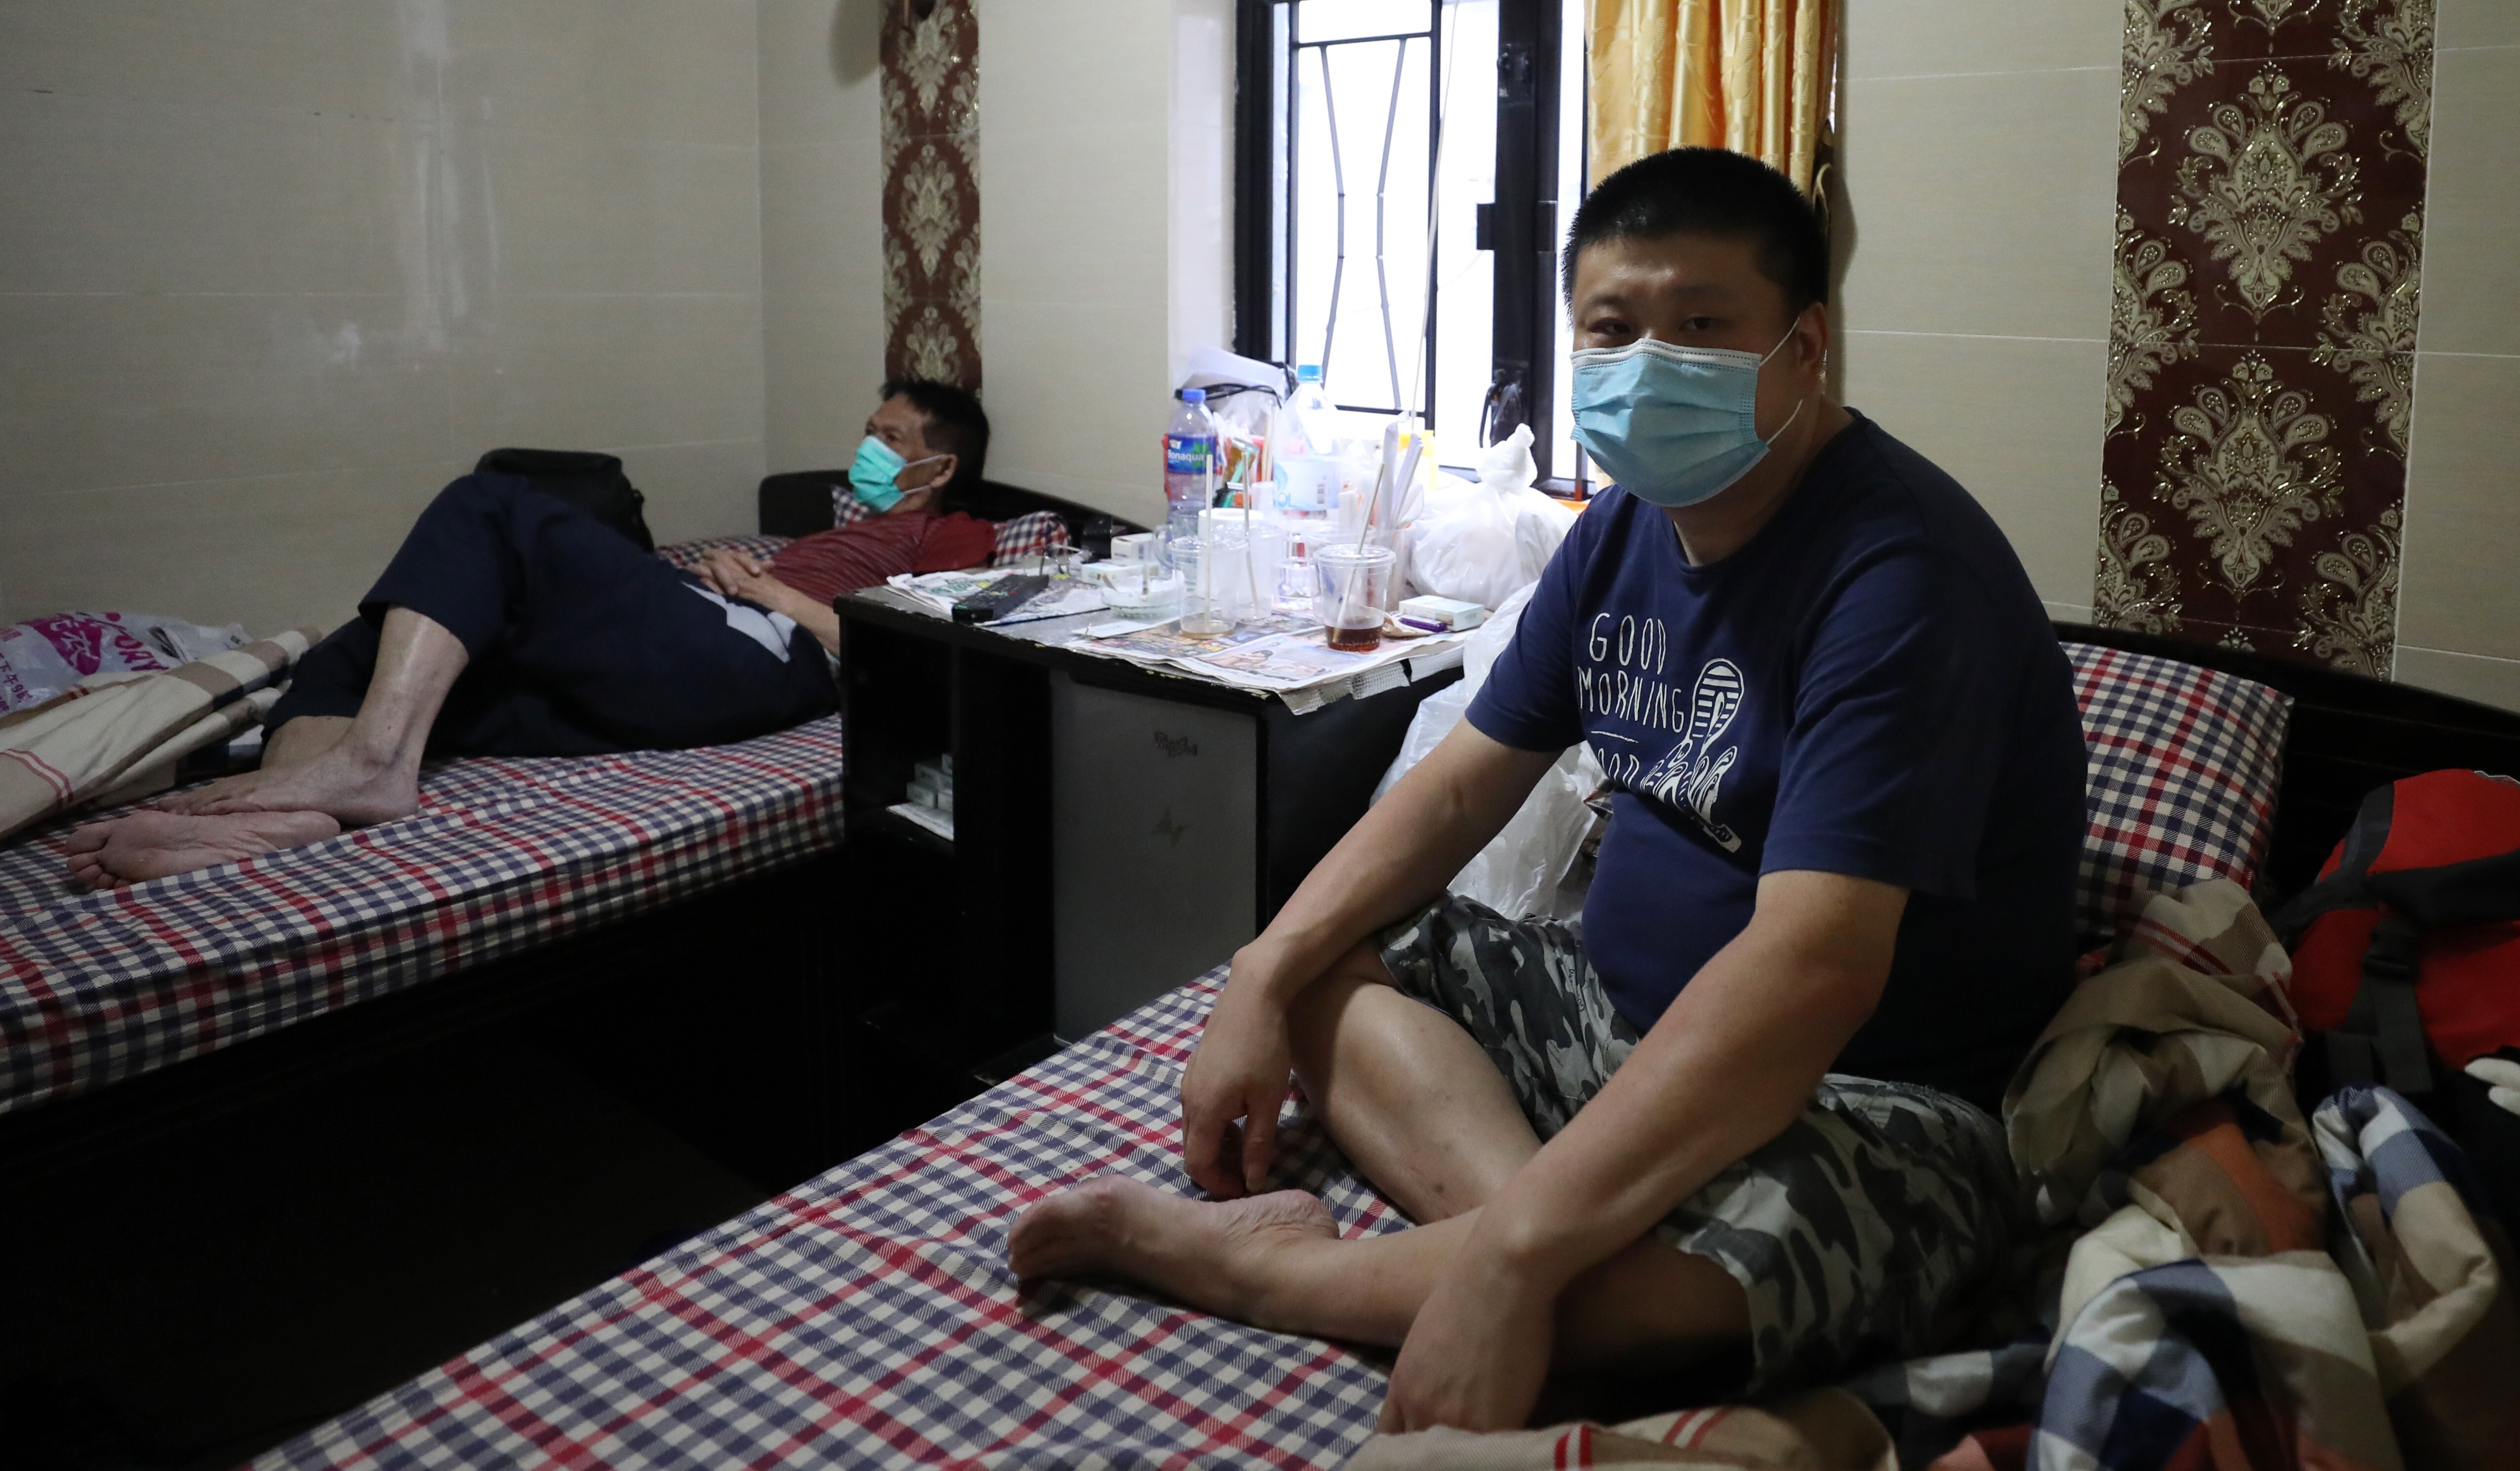 Chu Lui, who lived in Shenzhen and worked in Hong Kong before the coronavirus pandemic, in his room at Chungking Mansions, Tsim Sha Tsui. Photo: Nora Tam